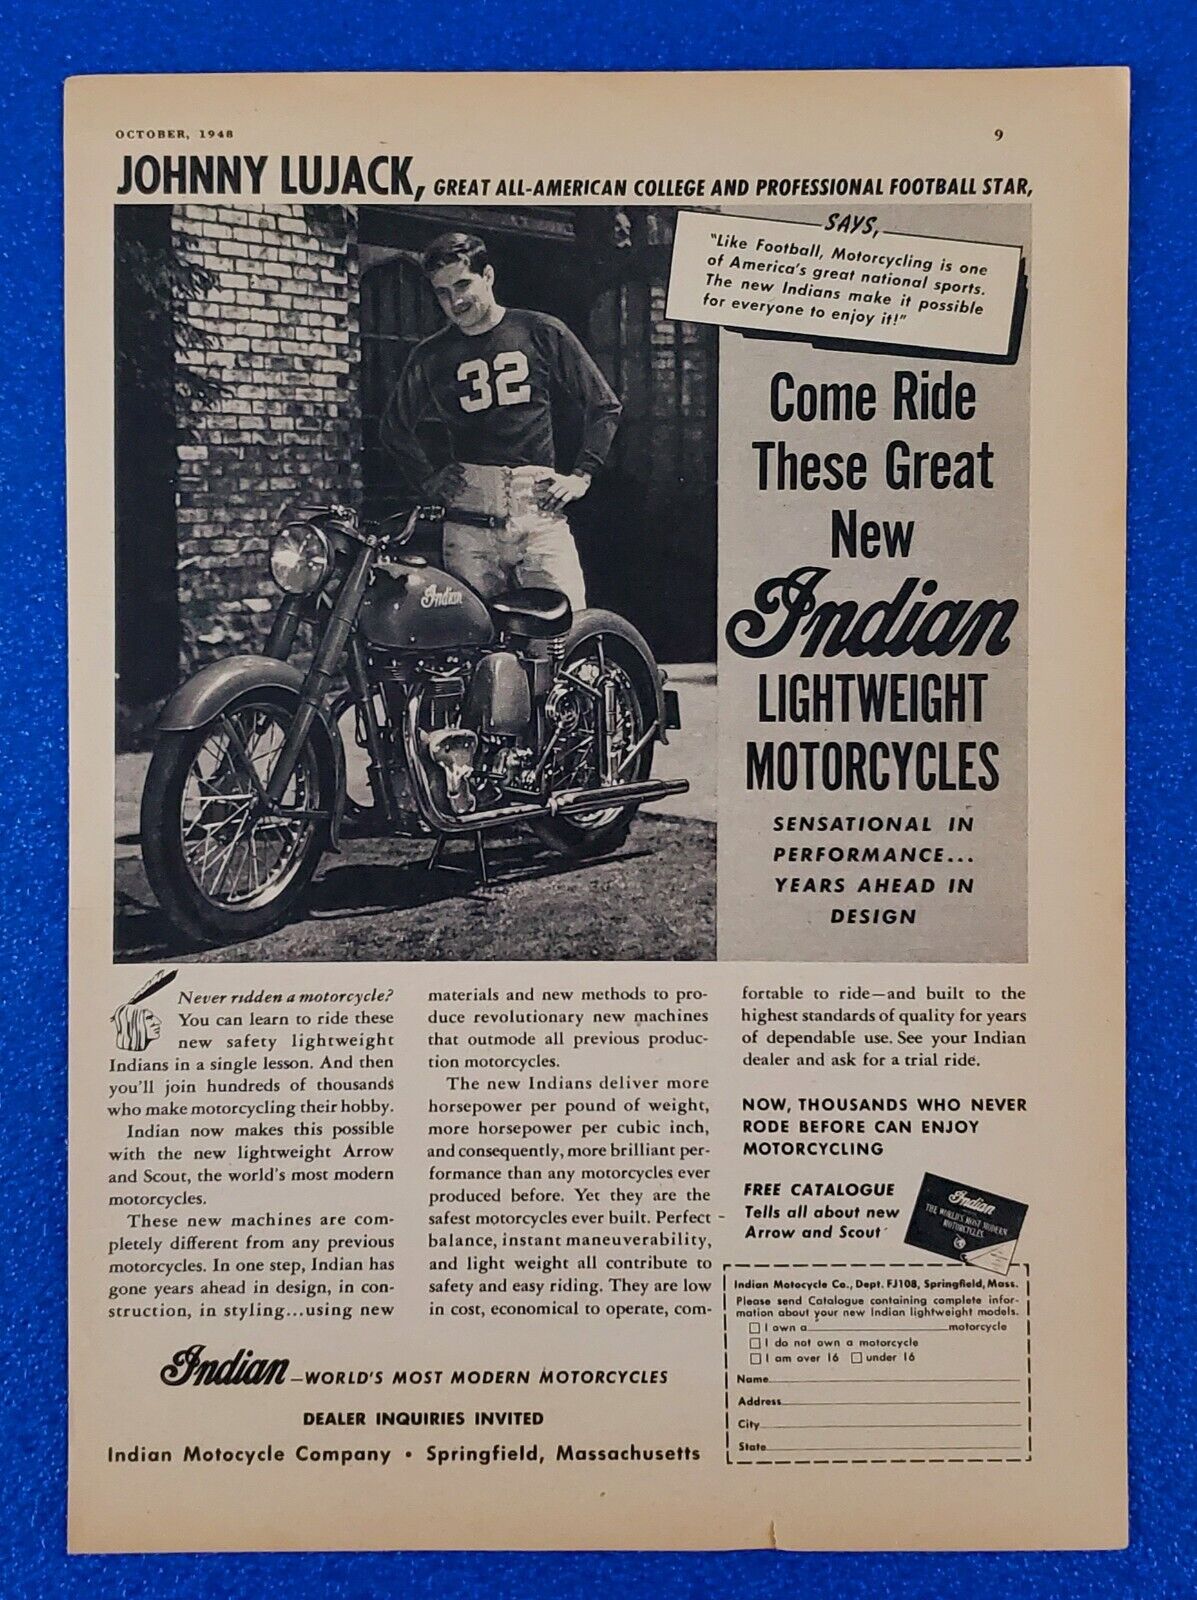 1948 INDIAN LIGHTWEIGHT MOTORCYCLE ORIGINAL PRINT AD W/ JOHNNY LUJACK SHIPS FREE